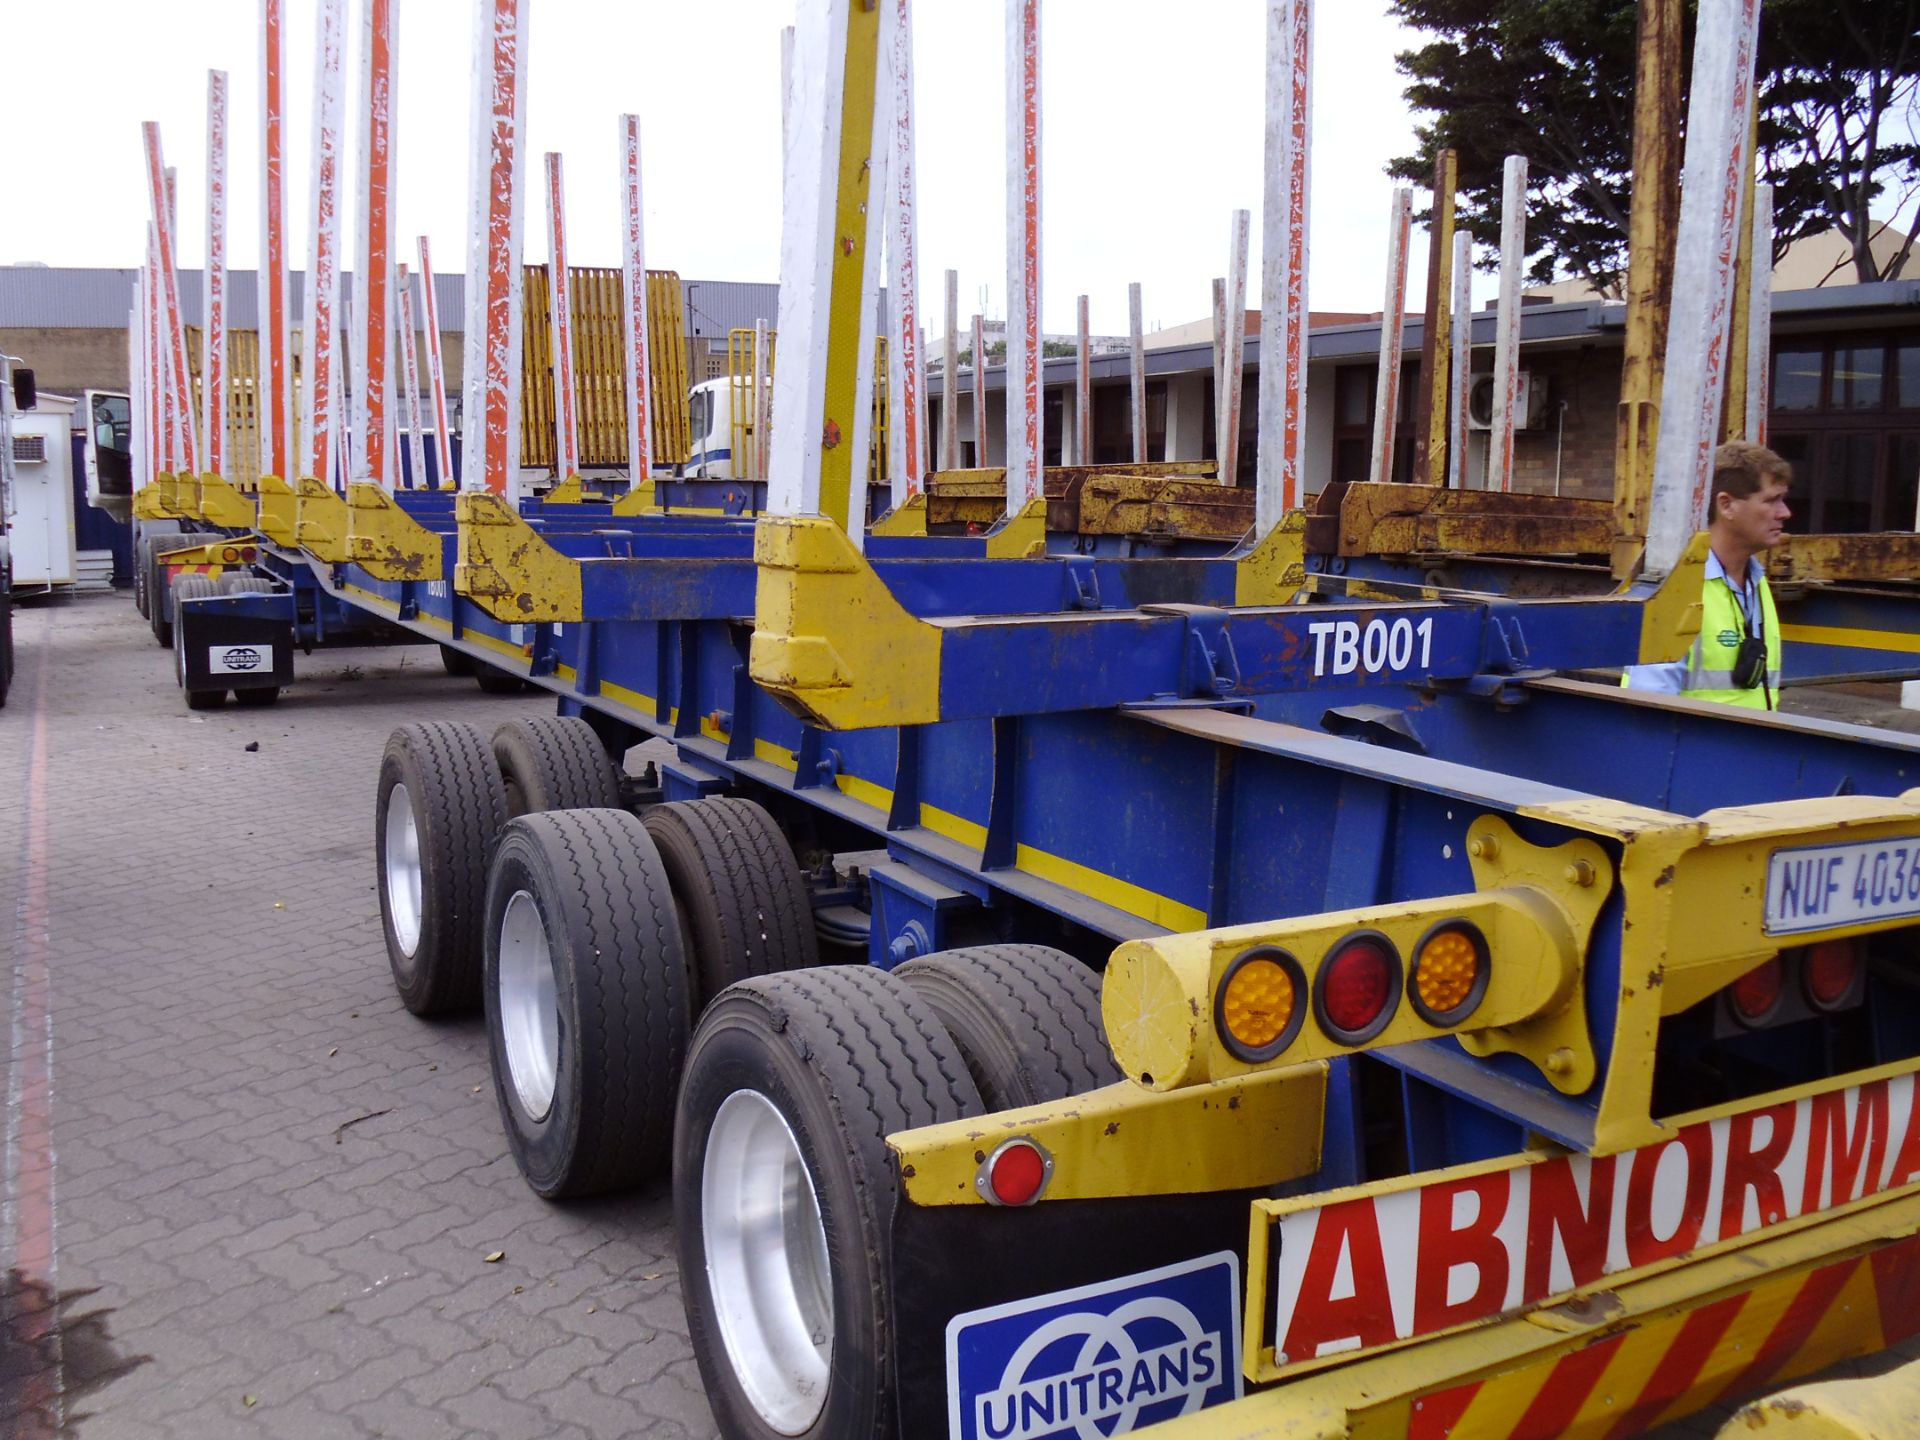 2011 TOHF 5 AXLE TIMBER D/BAR NUF40362 - (TDB001) - LOCATION KZN - Subject to Confirmation - Image 3 of 6